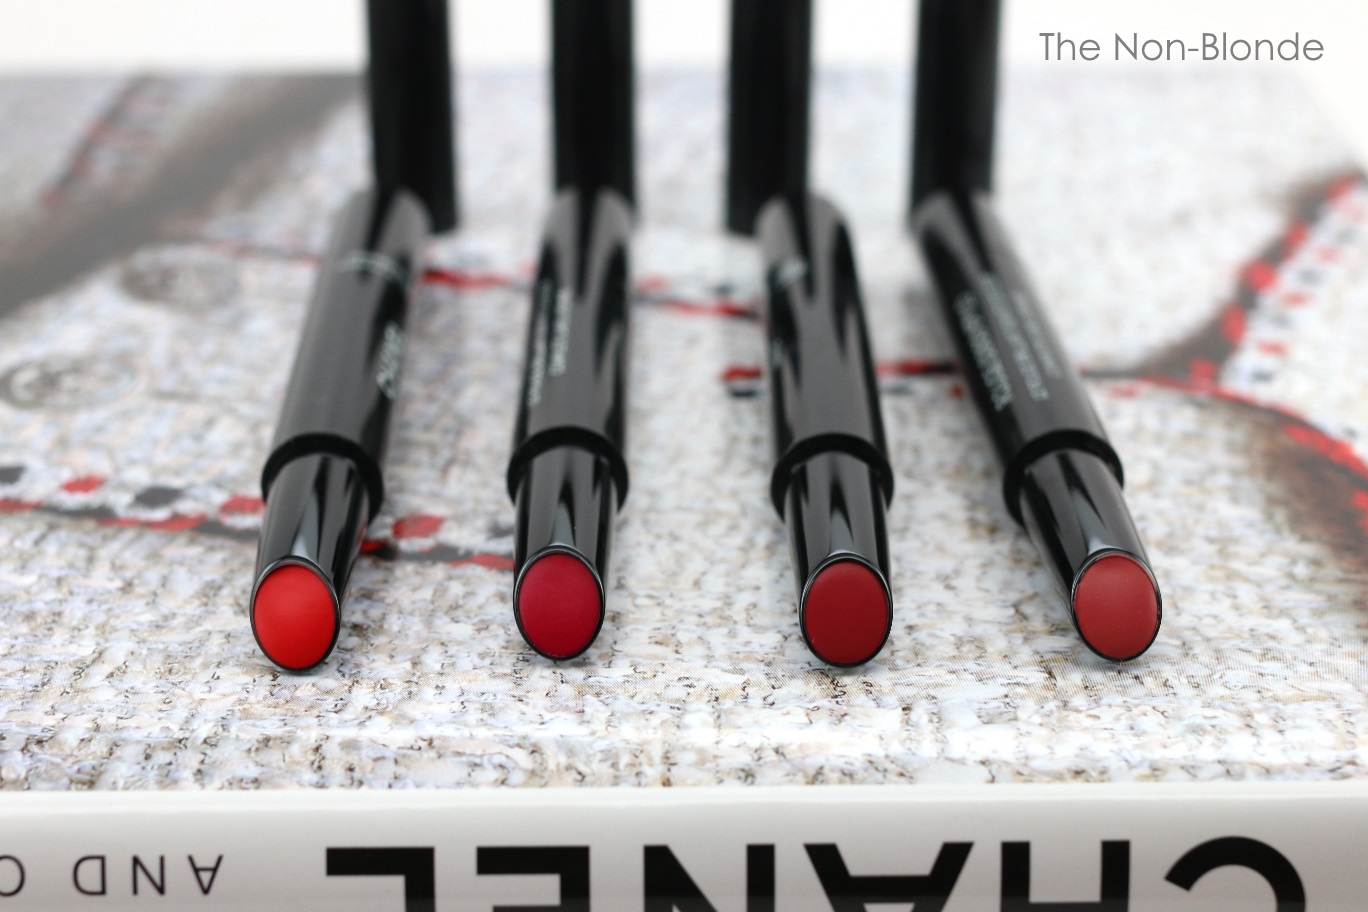 Chanel Rouge Coco Stylo Complete Care Lipshine - The Beauty Look Book